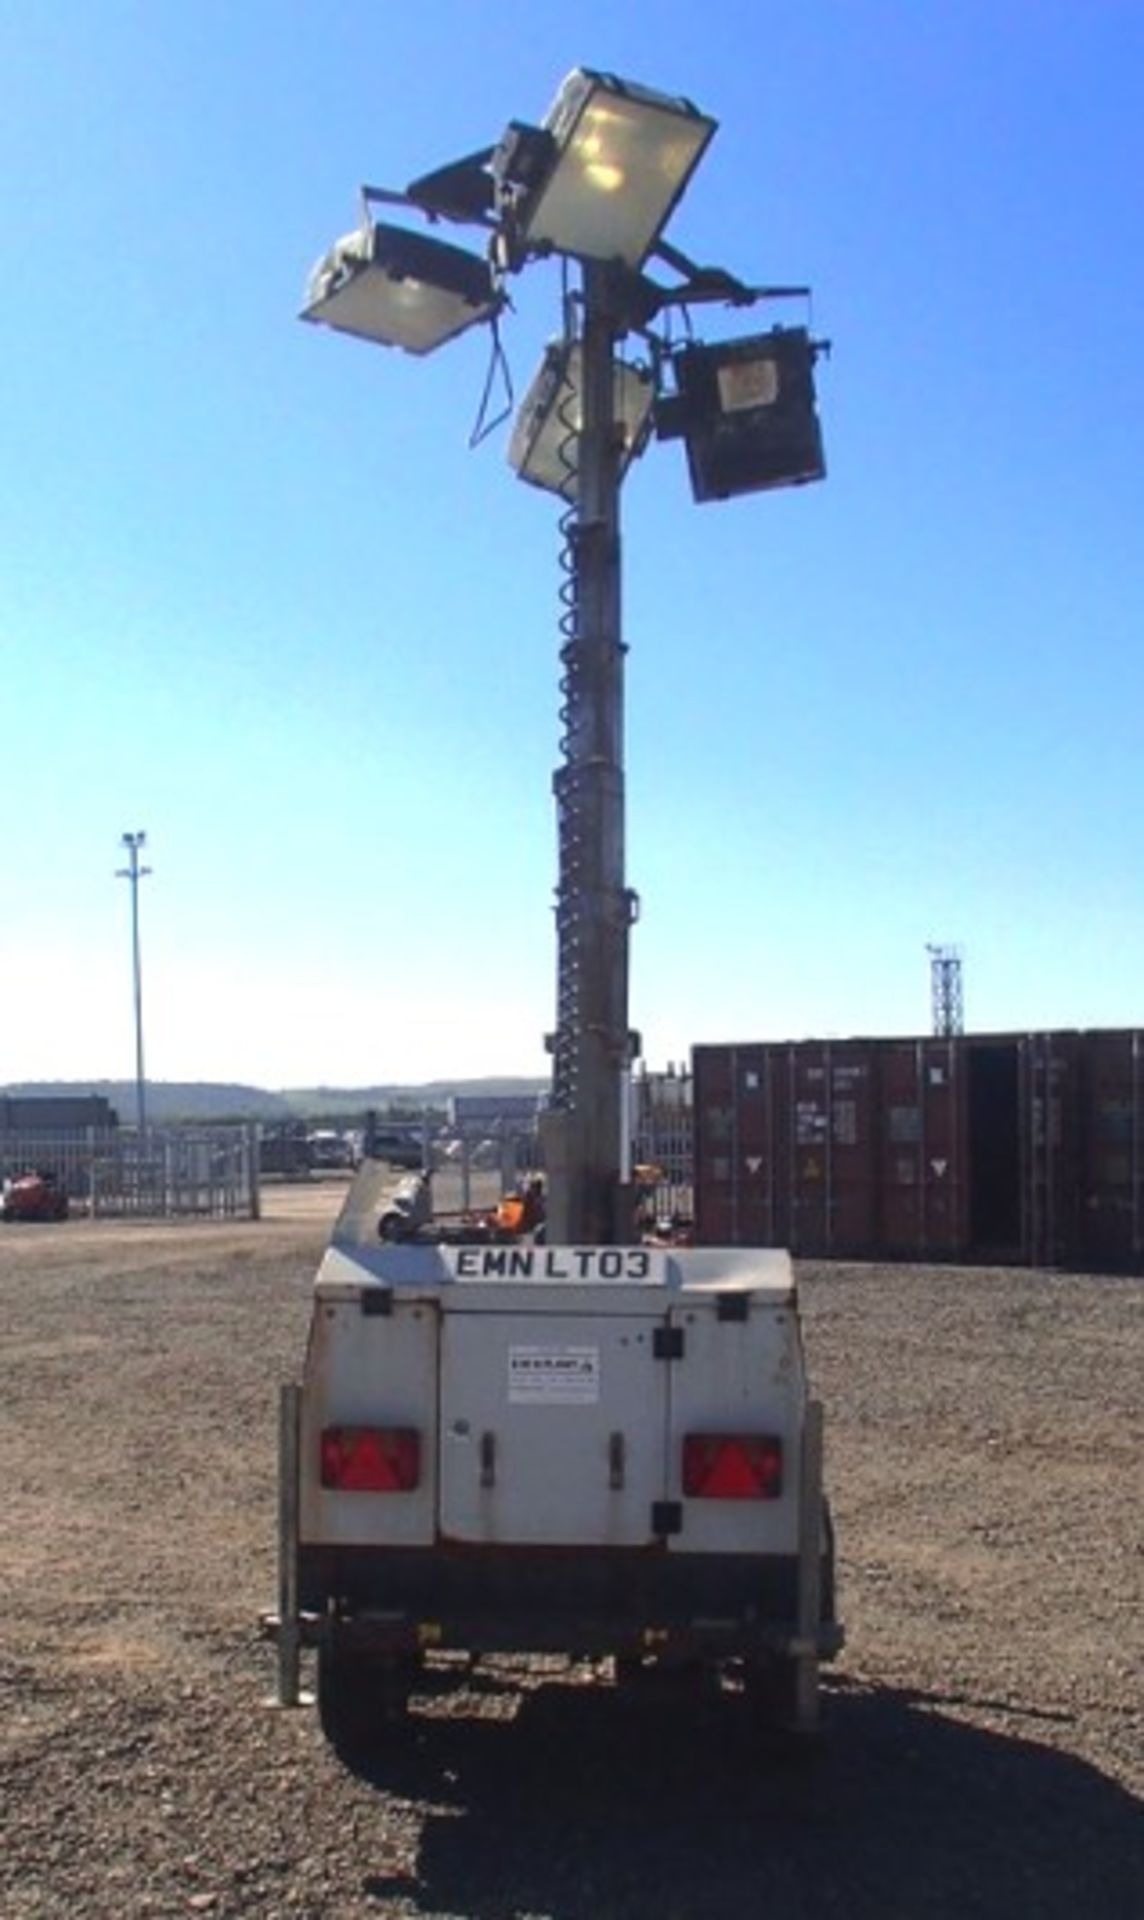 2010 SMC TL-90 SN t90108721 TOWABLE TOWER LIGHTS. ENGINE POWR 7.7KW@1500RPM. 932 HRS - Image 3 of 6